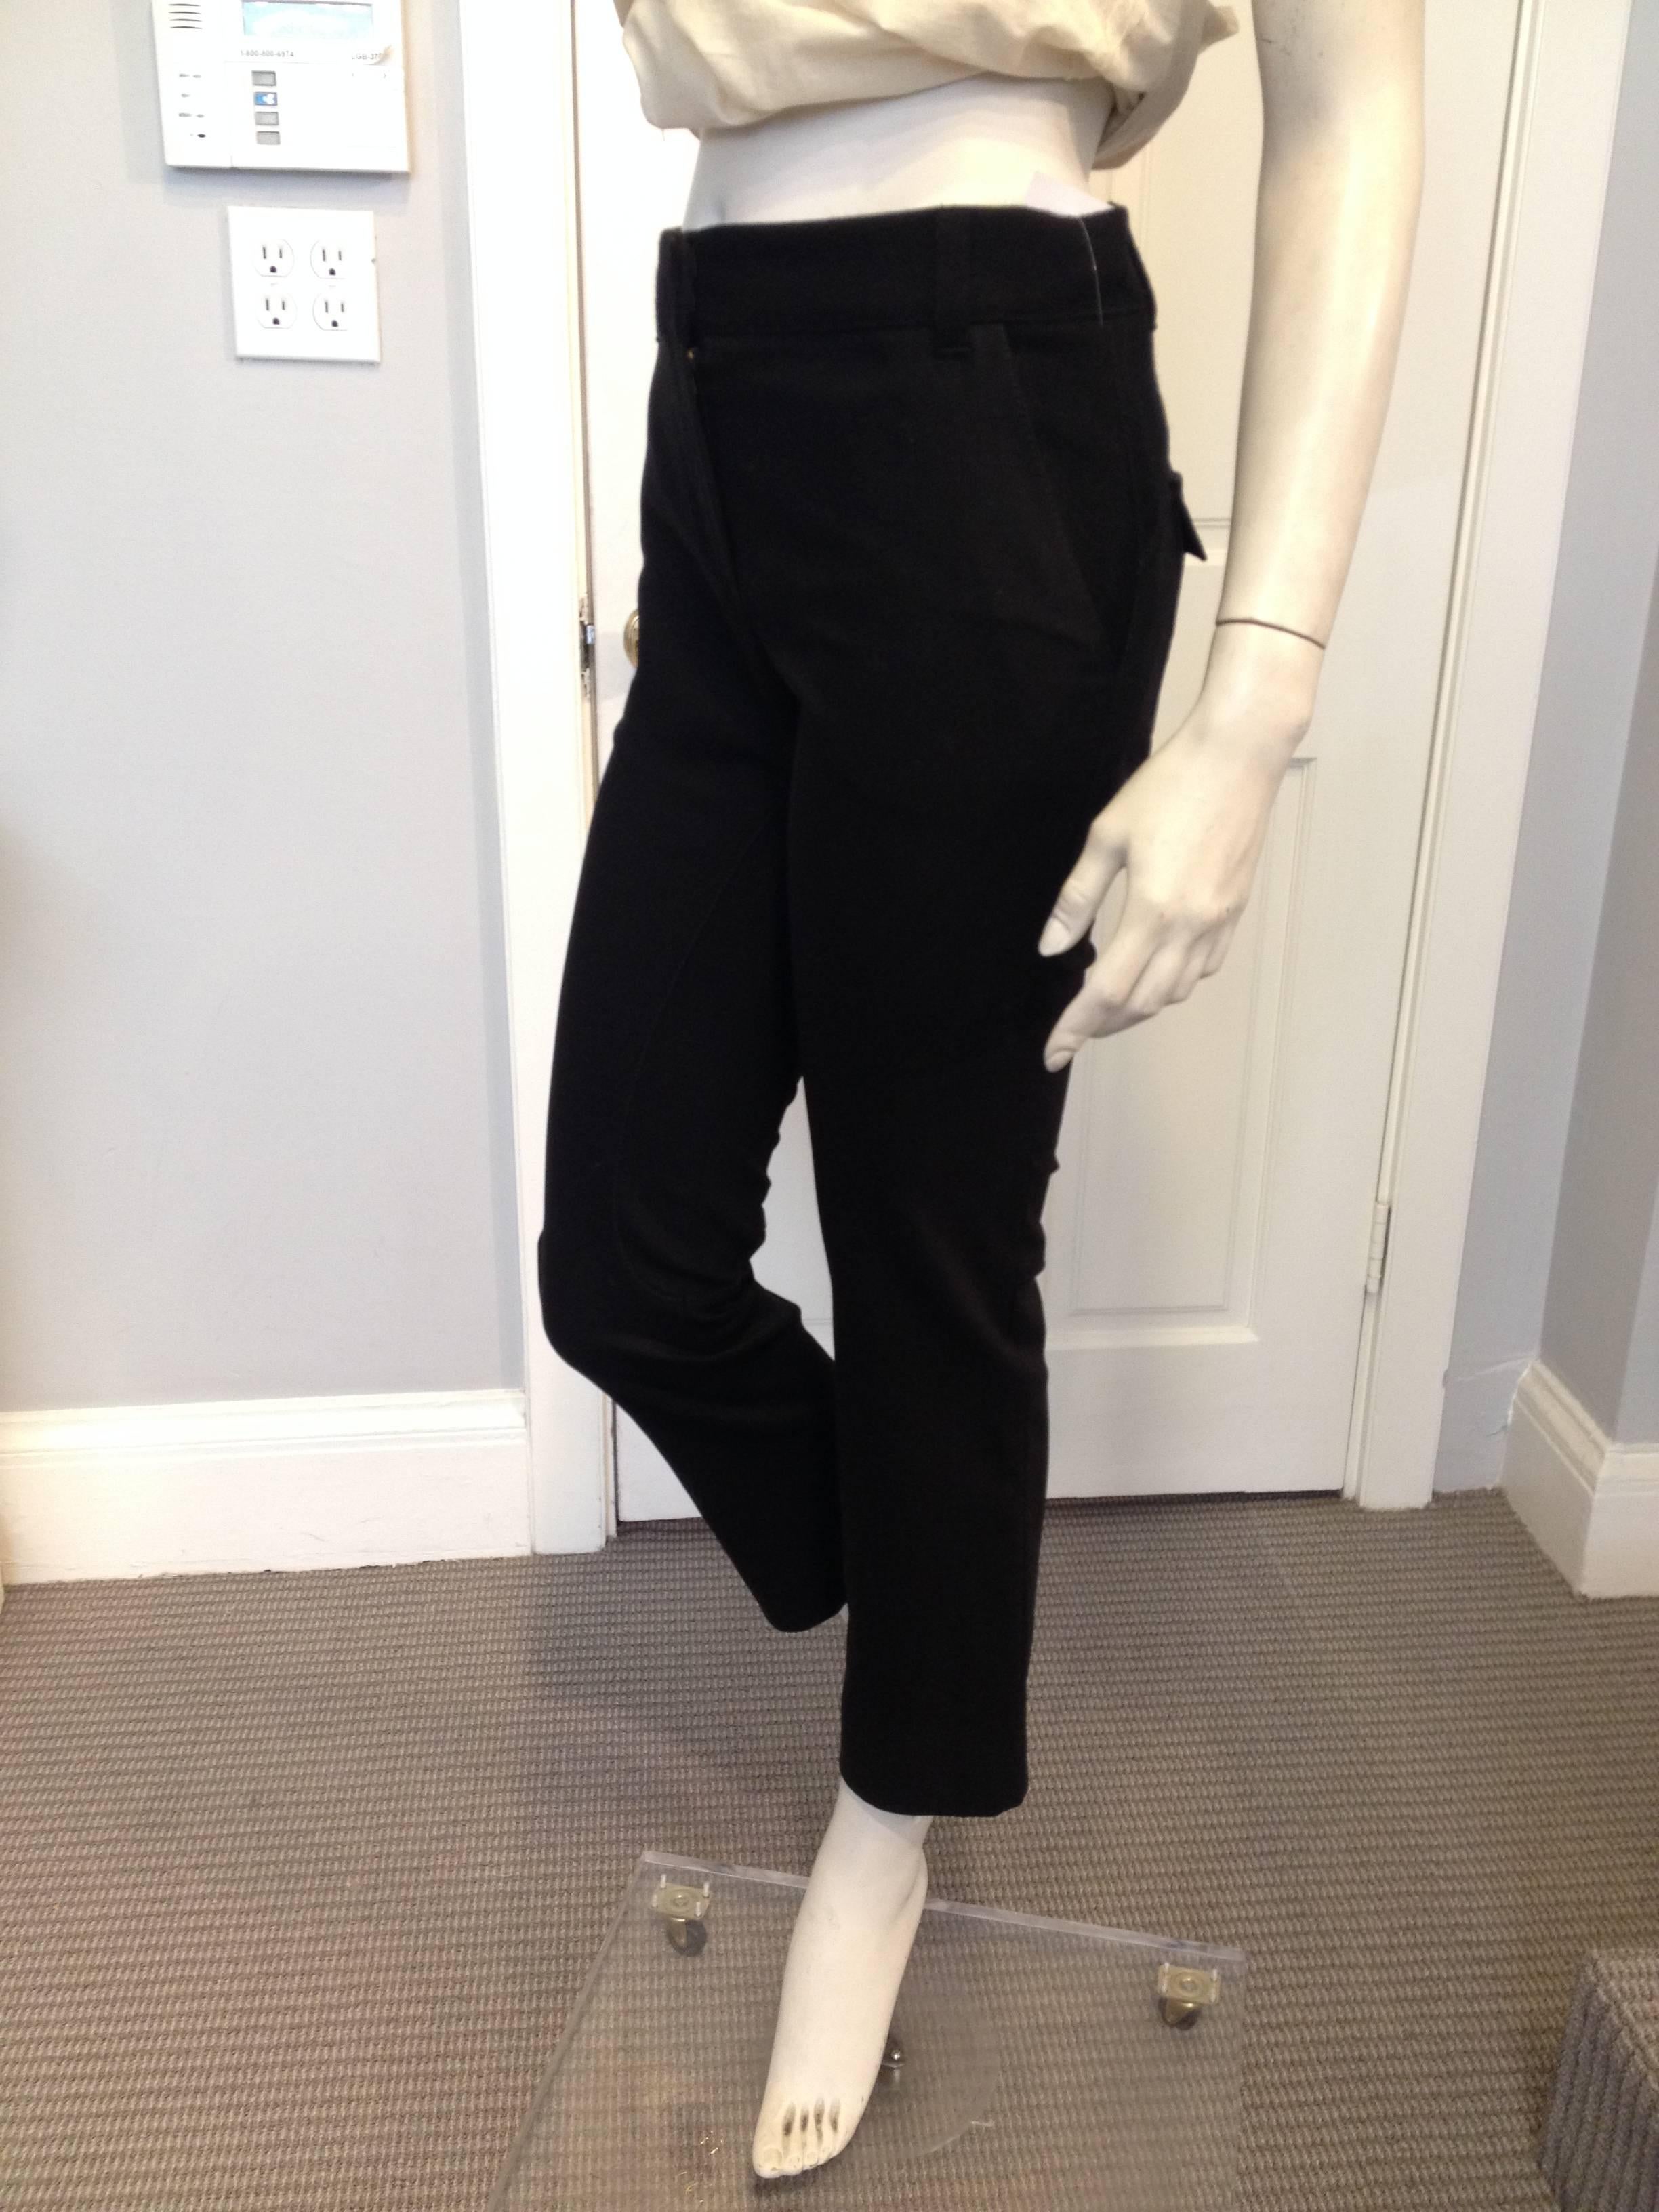 These pants offer military styling in a wearable way. Cut from a combination of two fabrics, a smooth woven textile and a softer woolier cashmere blend, these pants are cool and effortless, perfect in the spring with a t-shirt or with a cashmere